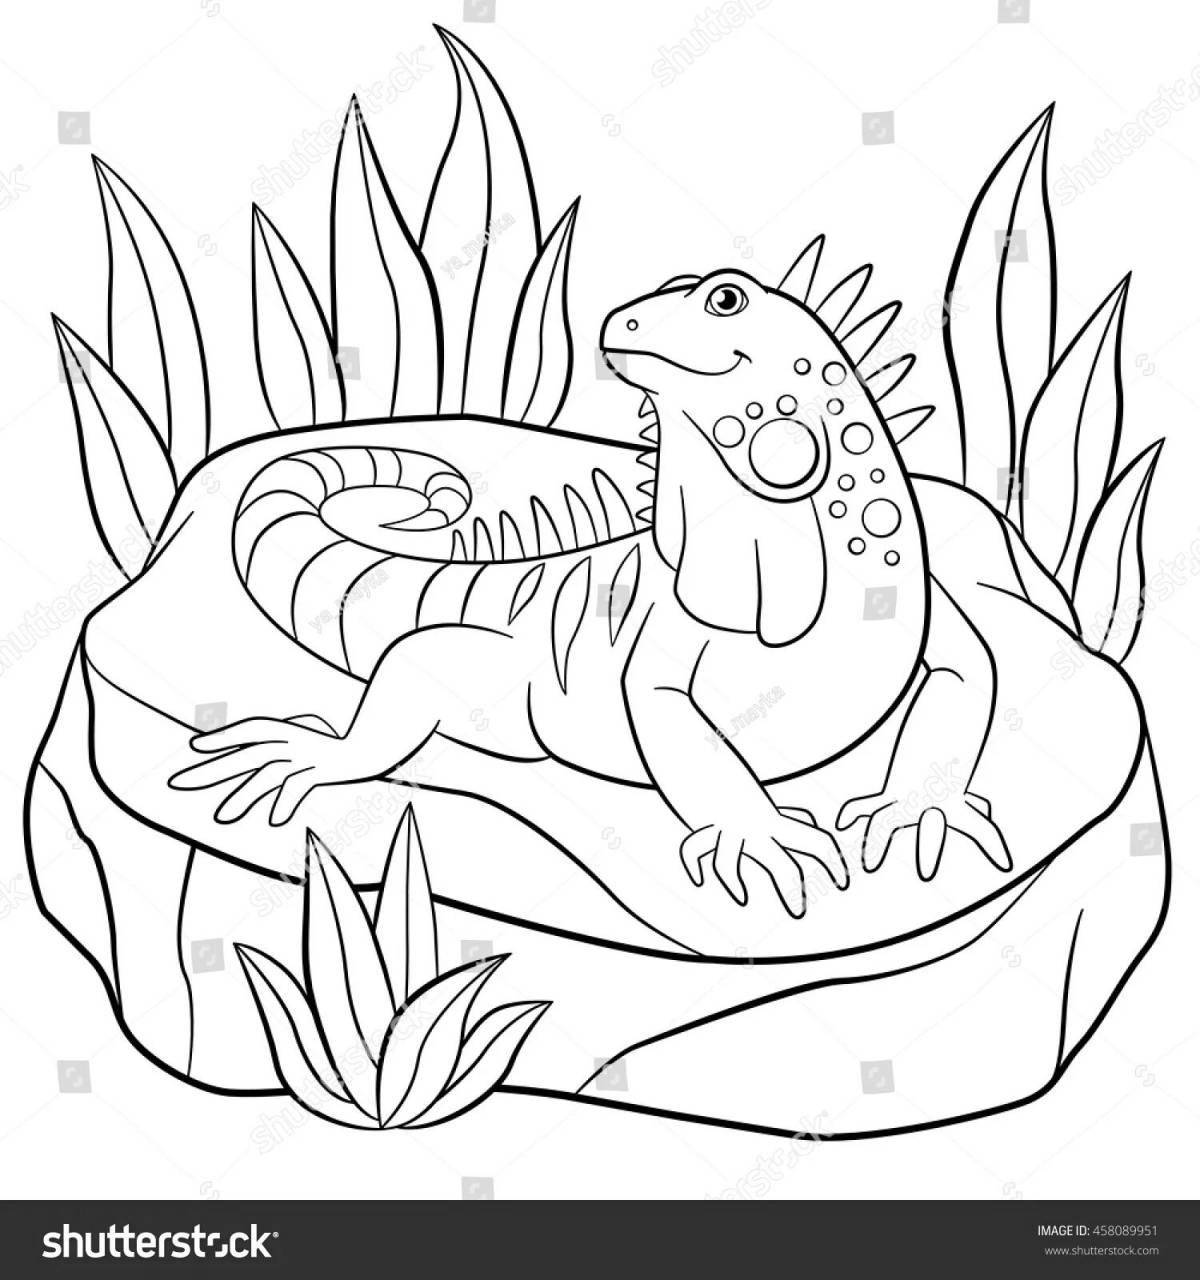 Creative iguana coloring book for kids